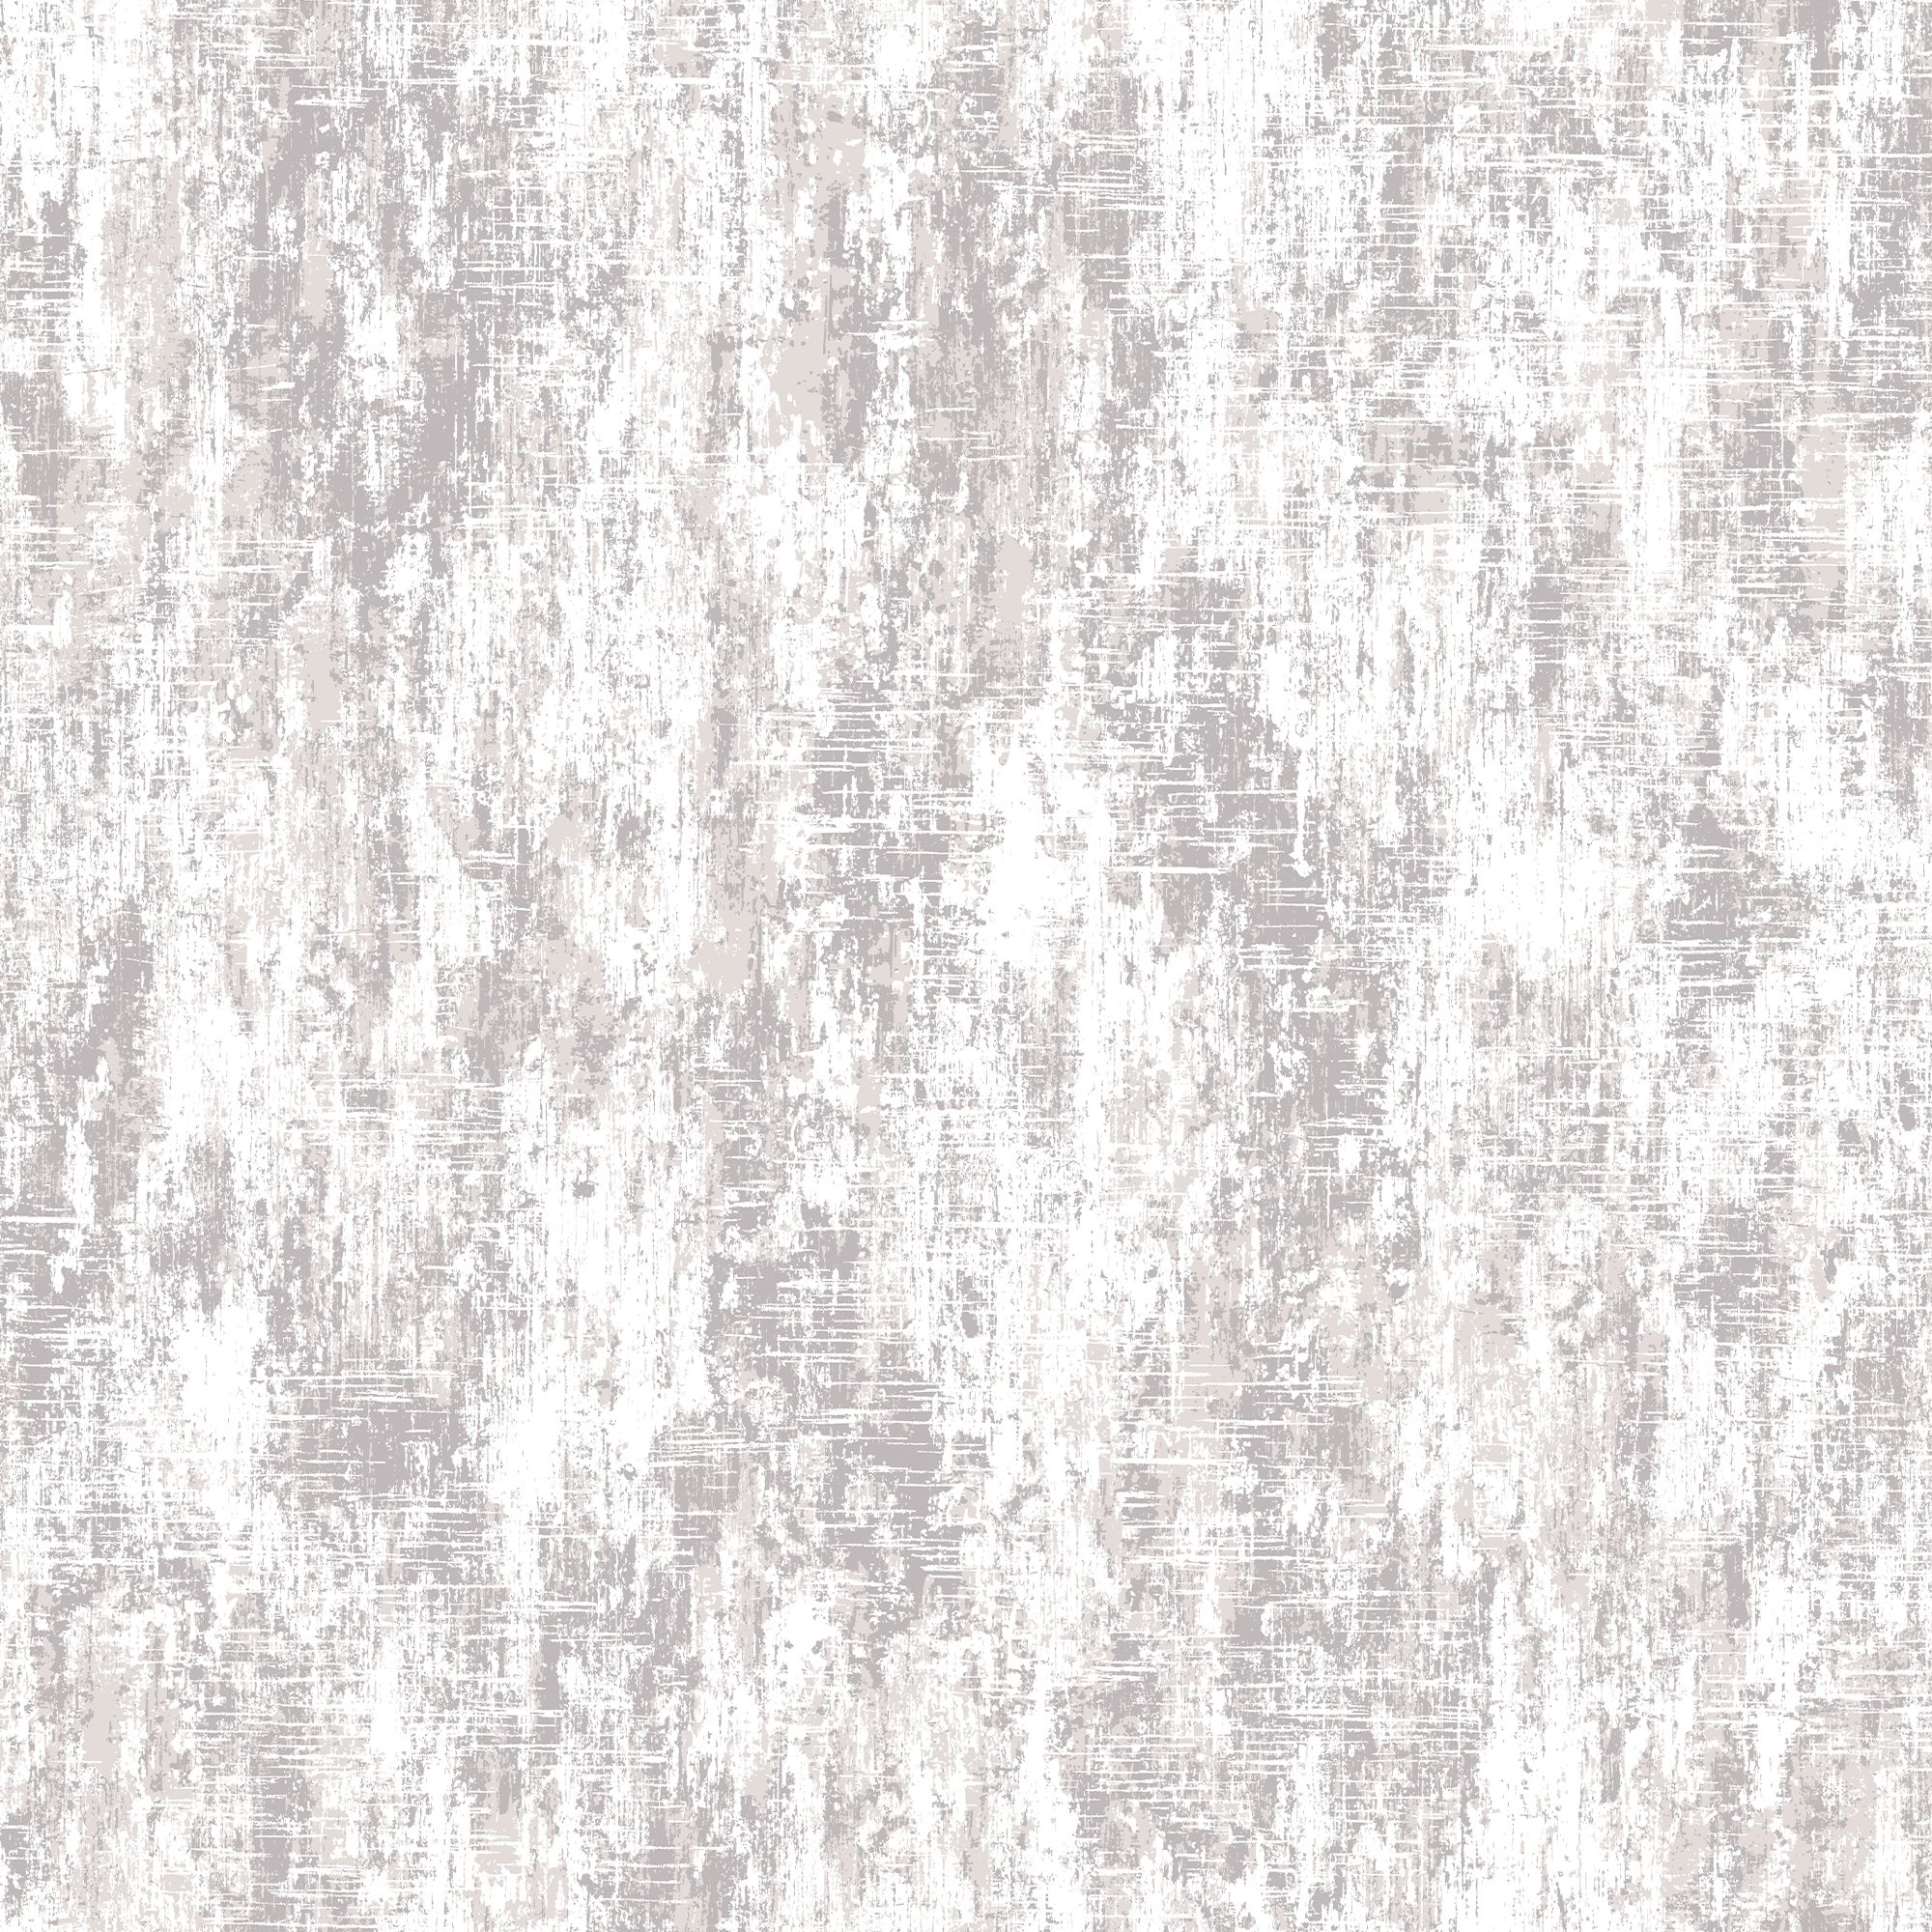 Laura Ashley Whinfell Moonbeam Metallic effect Industrial Smooth Wallpaper